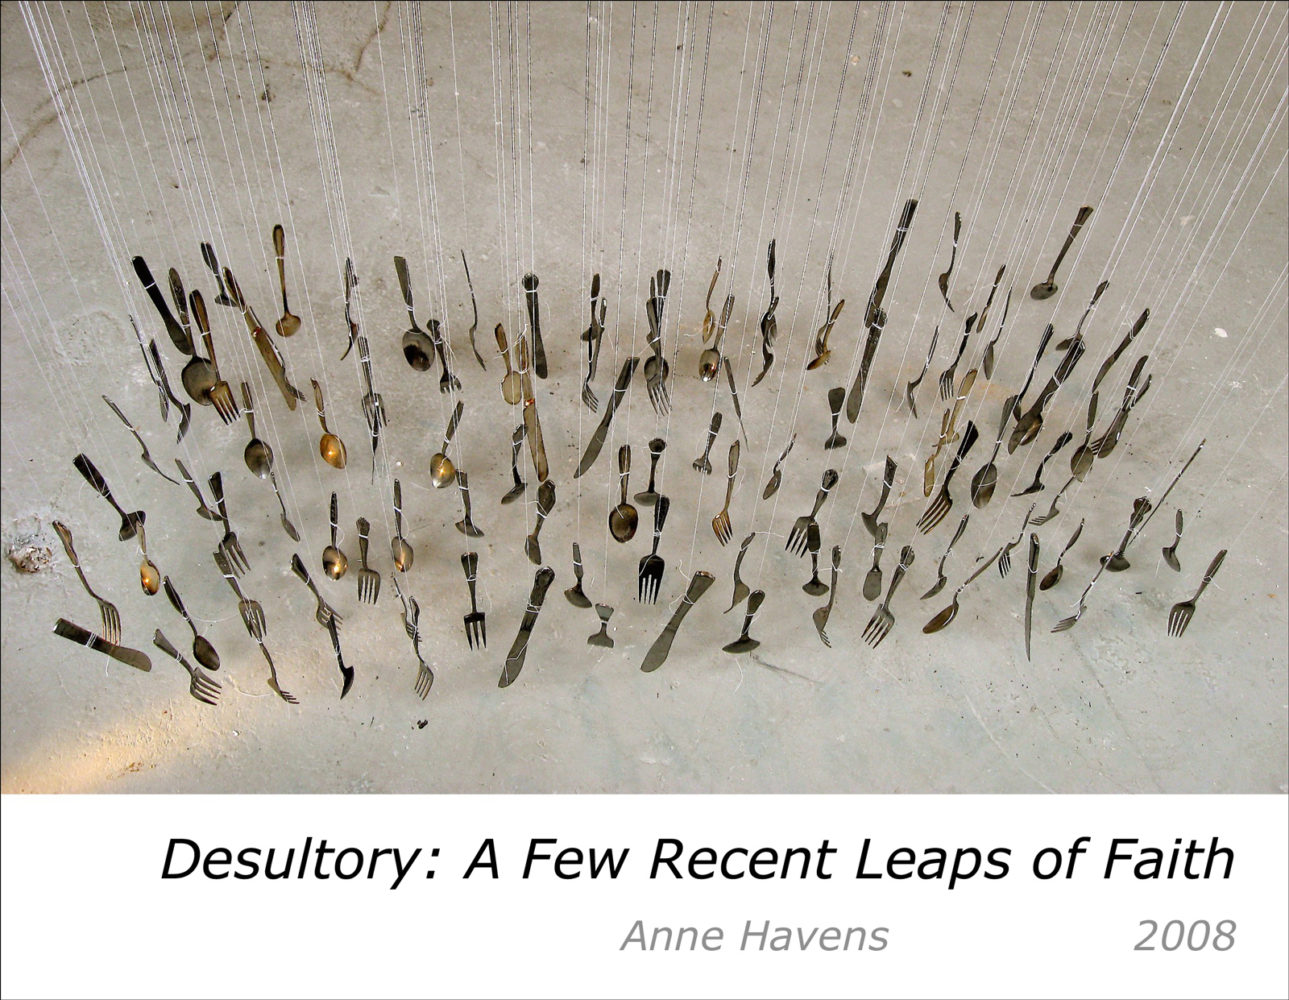 Cover of Anne Havens "Desultory: A Few Recent Leaps of Faith" 2008